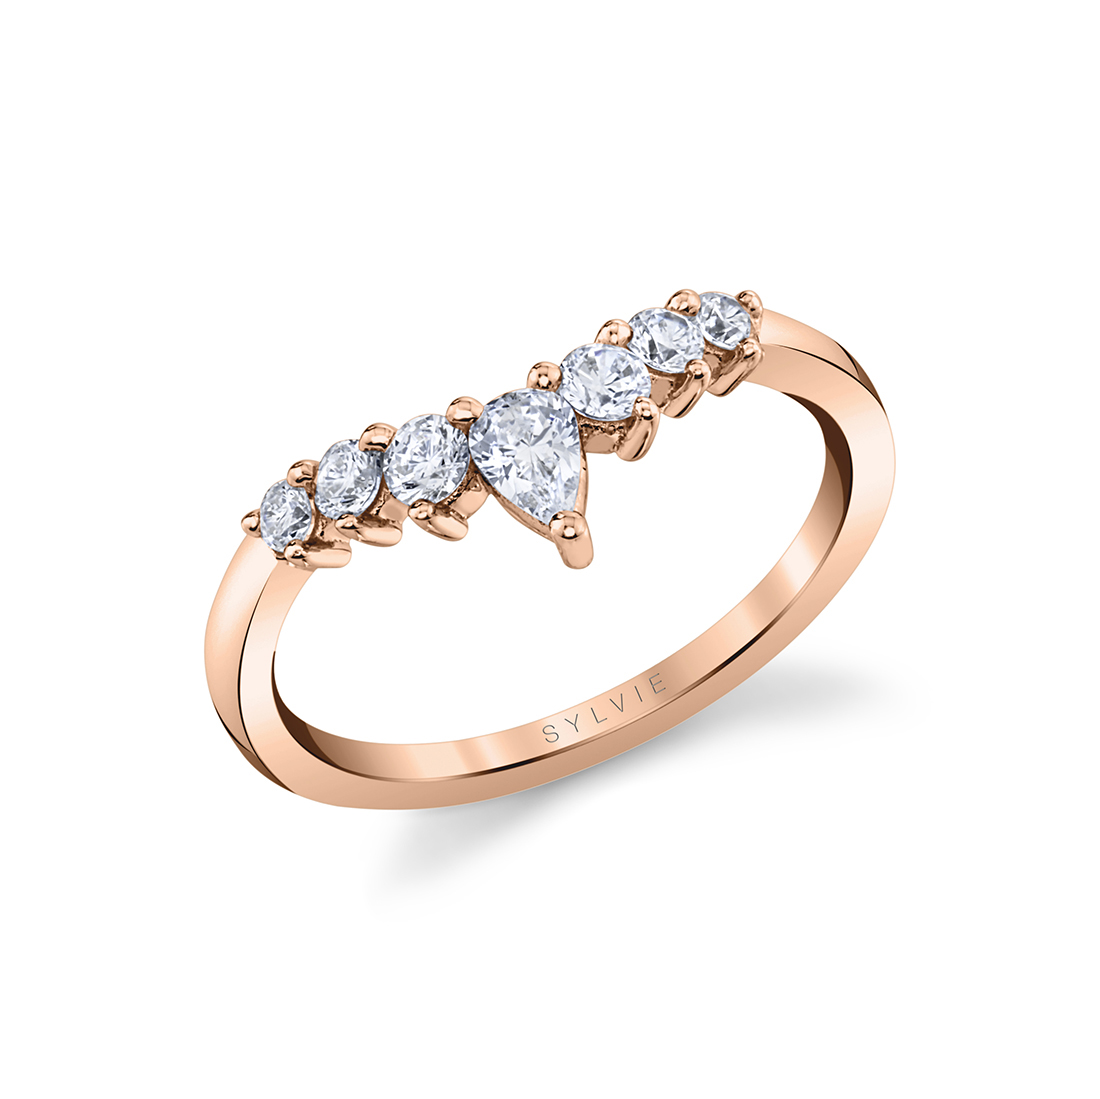 curved diamond wedding band in rose gold